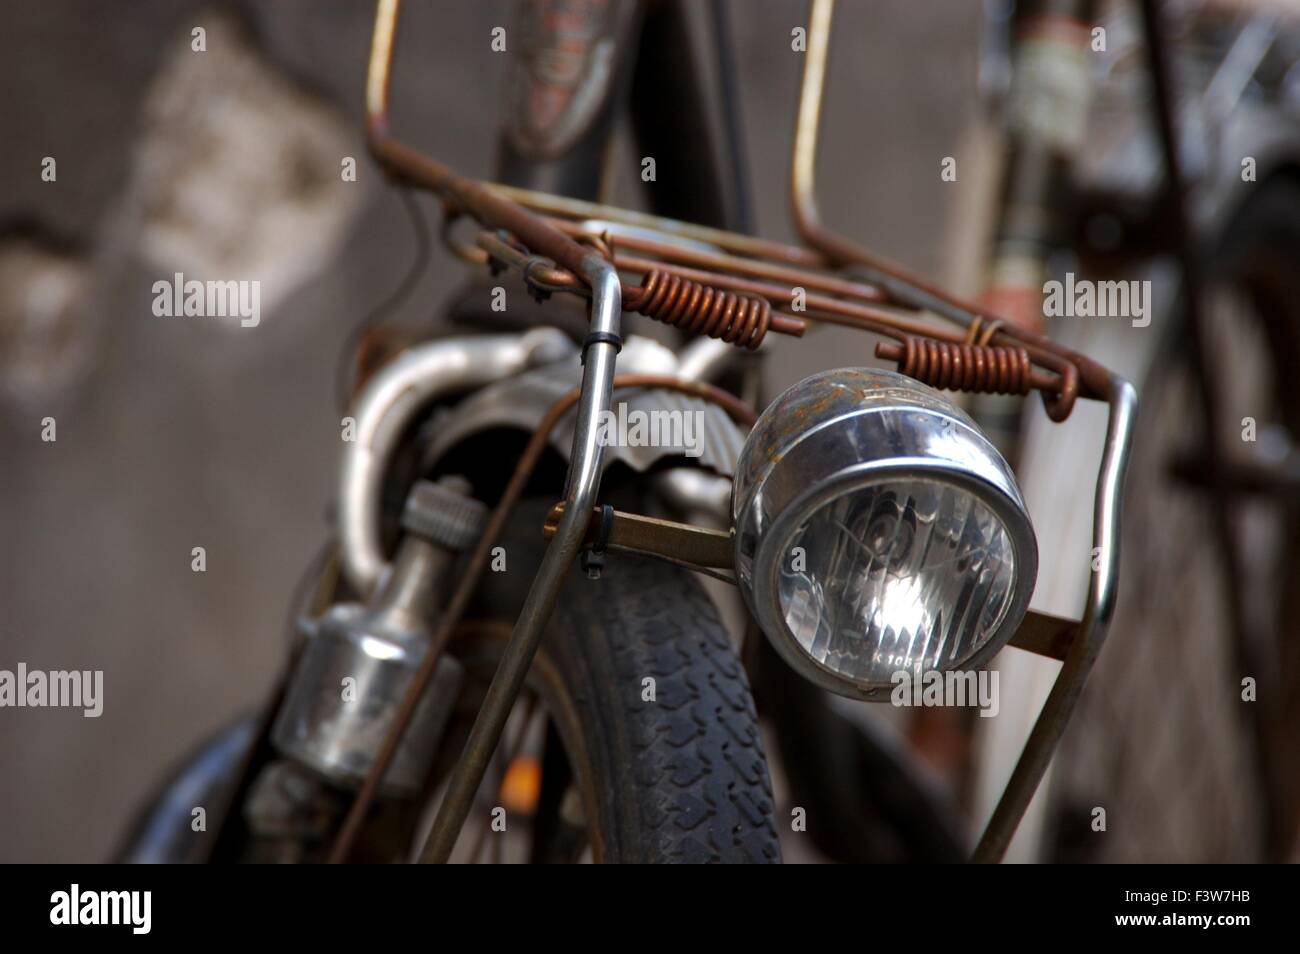 Fahrradlampe High Resolution Stock Photography and Images - Alamy